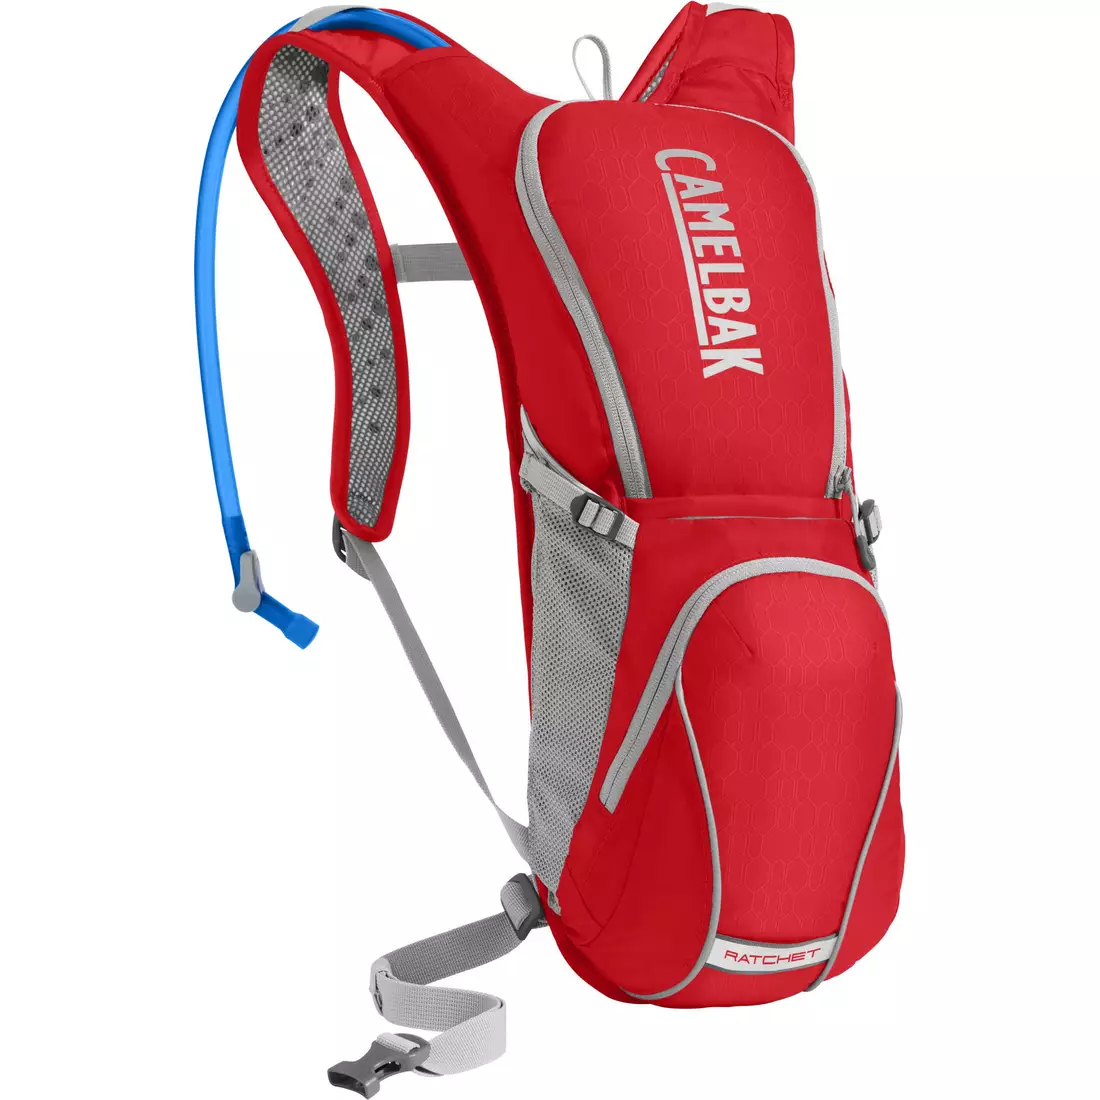 Camelbak SS18 backpack with a water bag RATCHET 100oz / 3L Racing Red/Silver 1297601000